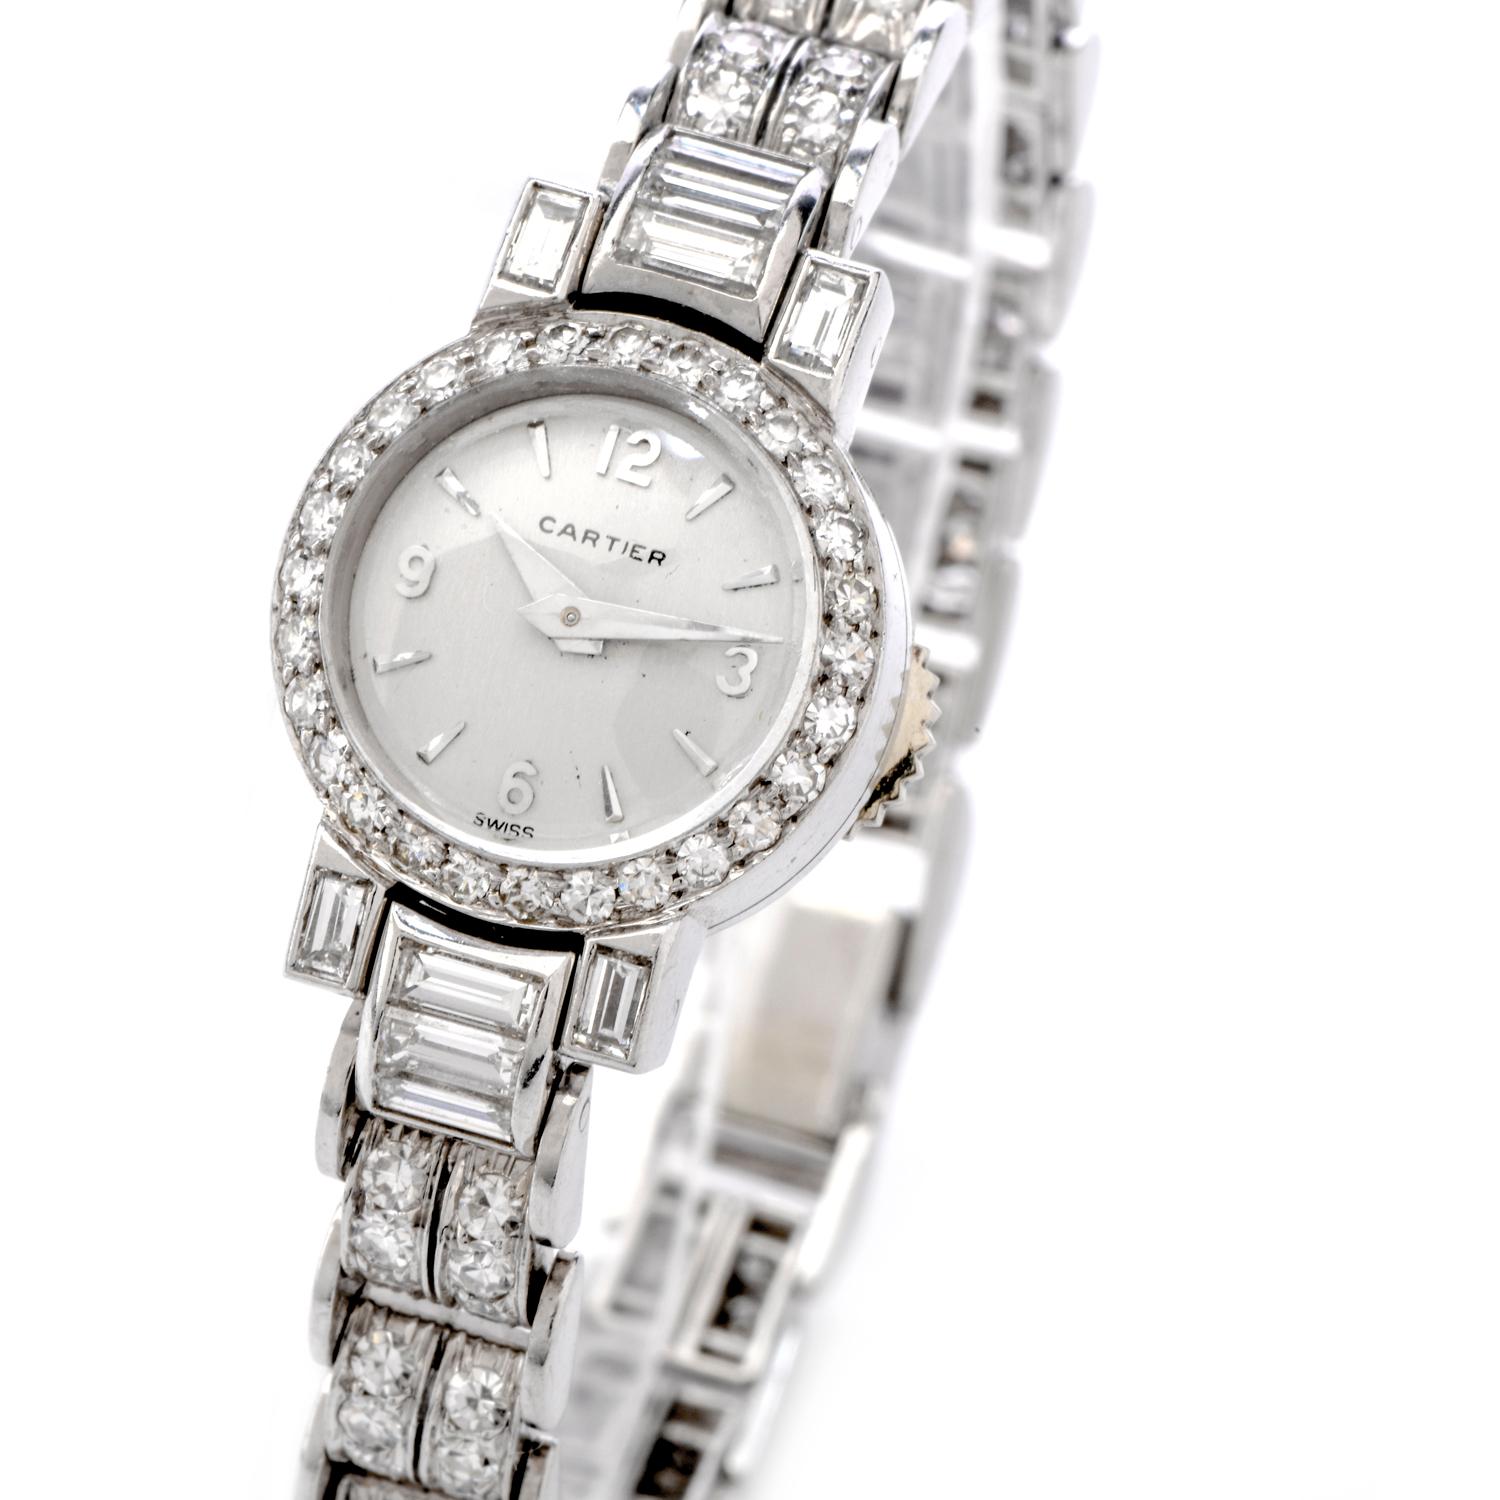 This timeless Vintage Cartier Ladies diamond watch is crafted in sensual 32.4 grams of platinum. This flexible link watch was created in the 1960s era.   Features 10 large baguettes cut Diamonds and 108 round faceted icy white Diamonds surrounding.